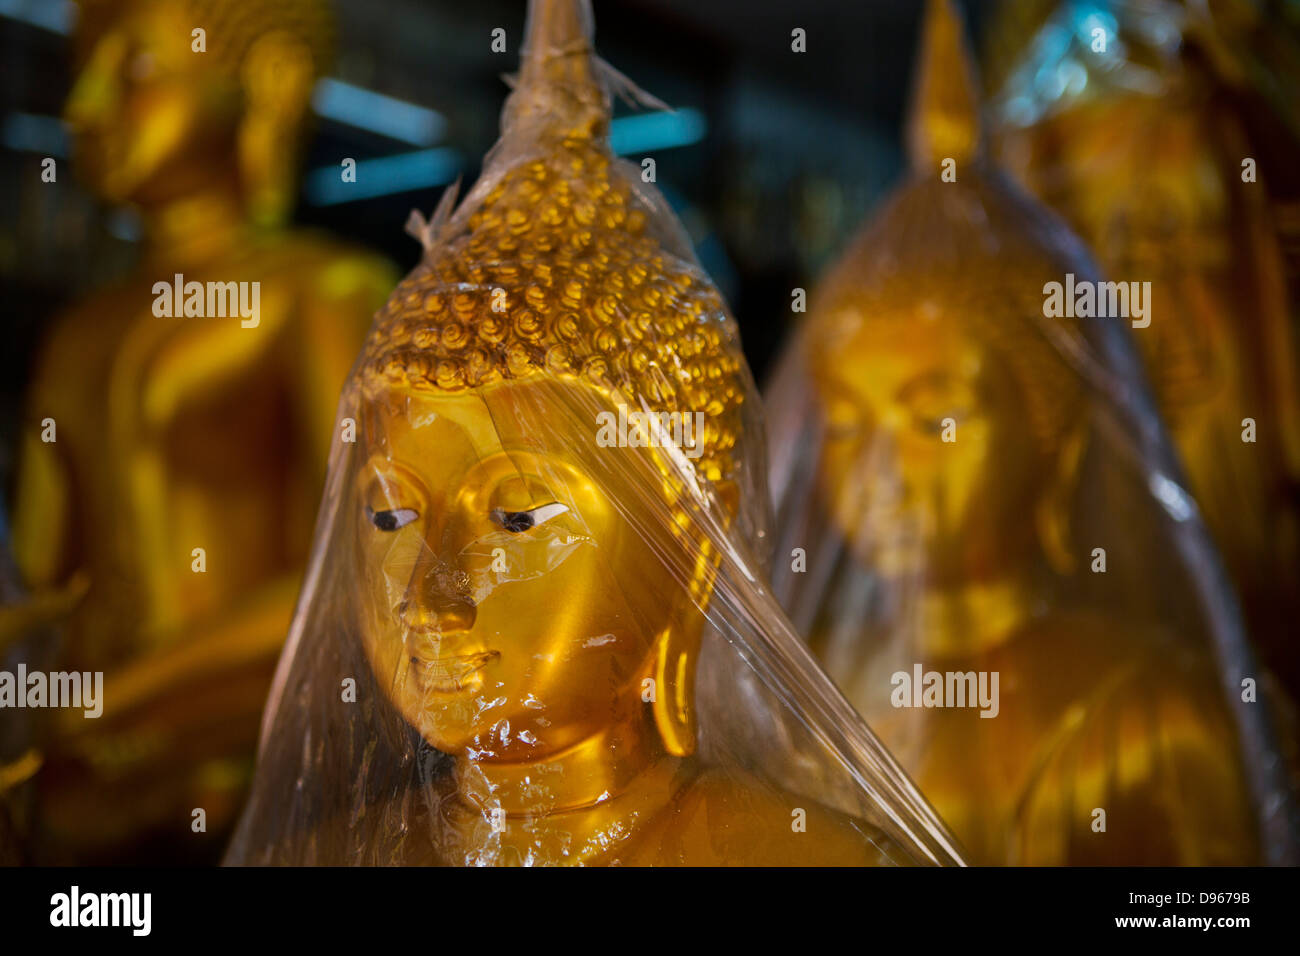 Covered buddhas for sale in shops situated in the heart of Bangkok Stock Photo